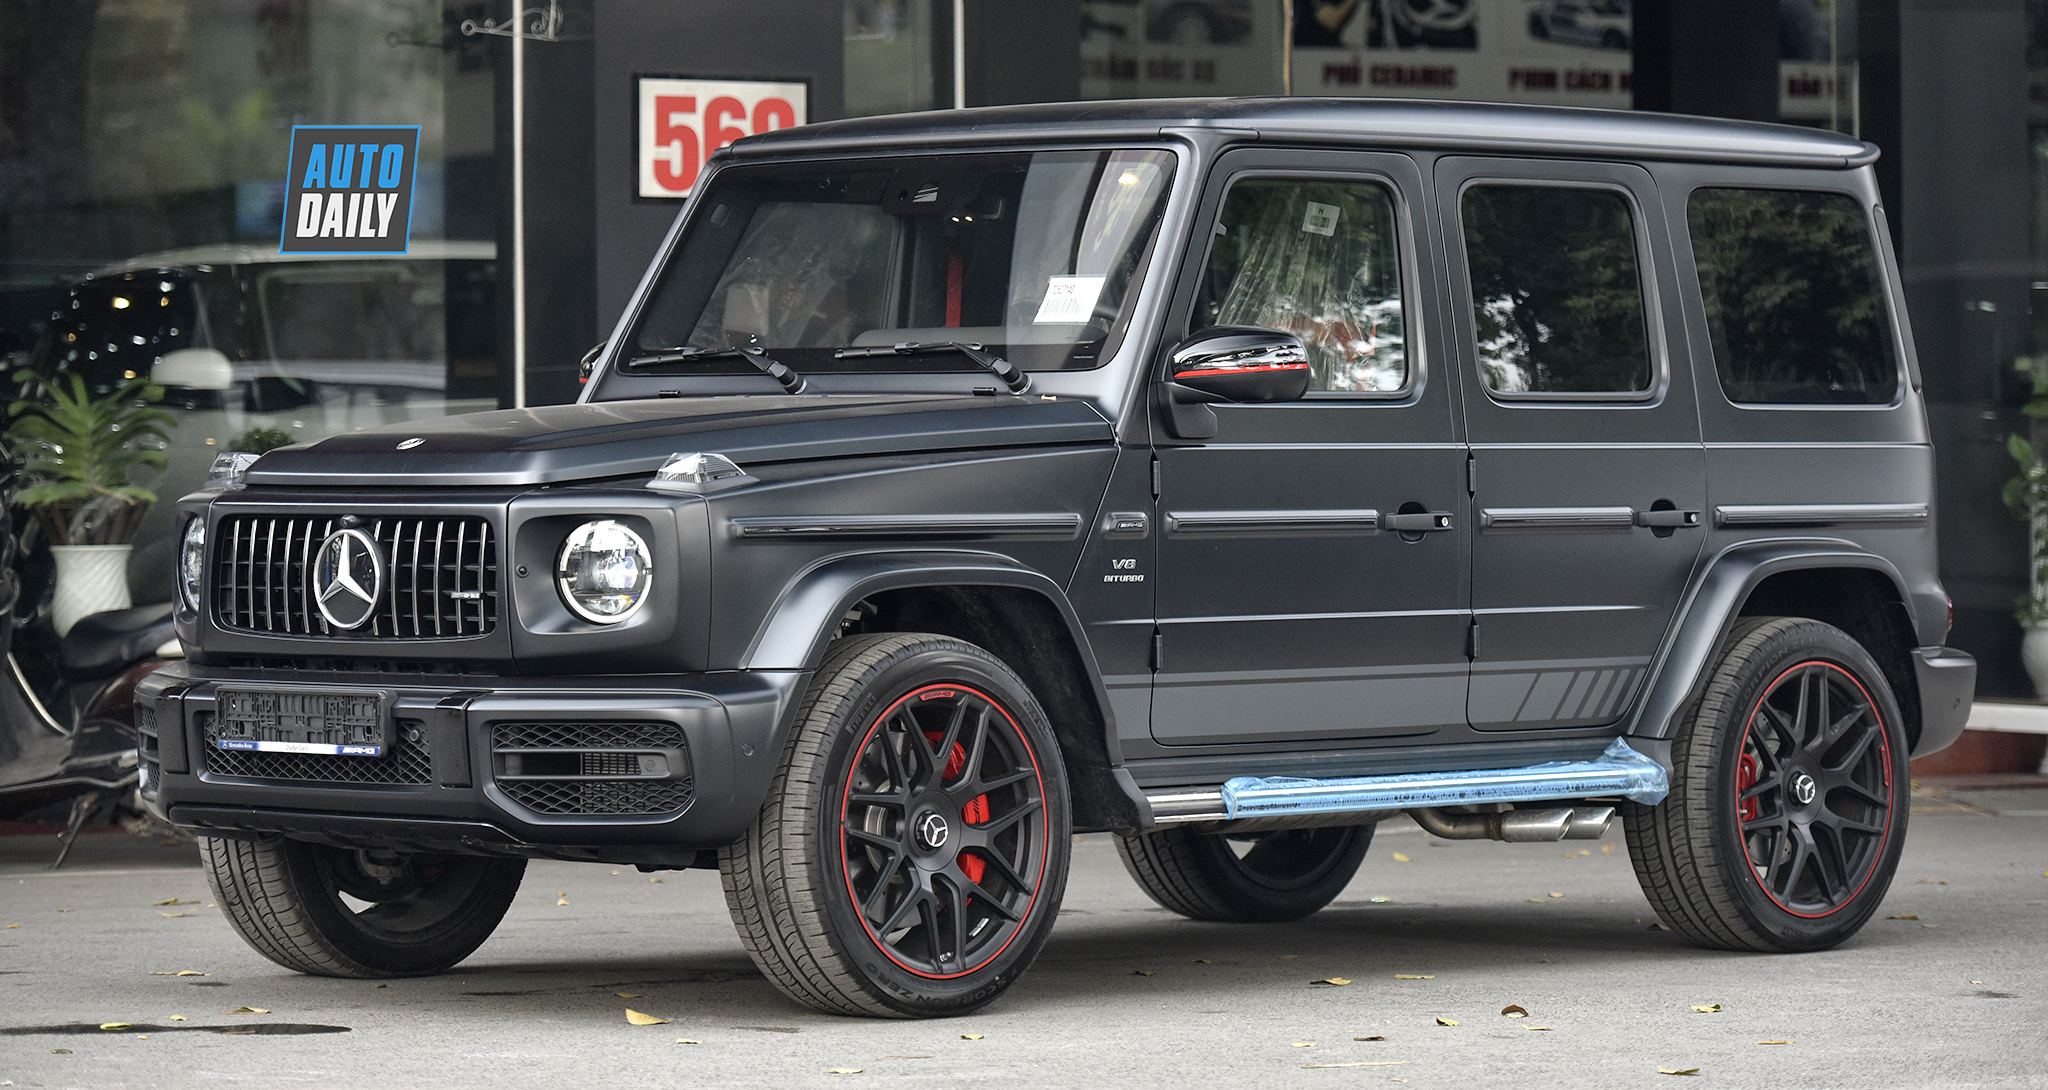 The World Was Taken Aback When Will Smith Unexpectedly Handed Over A Mercedes-amg G63 To Michael Jordan, As A Gesture Of Thanks For His Commitment To Appearing In Smith’s Upcoming Film Project. – Luxury Blog